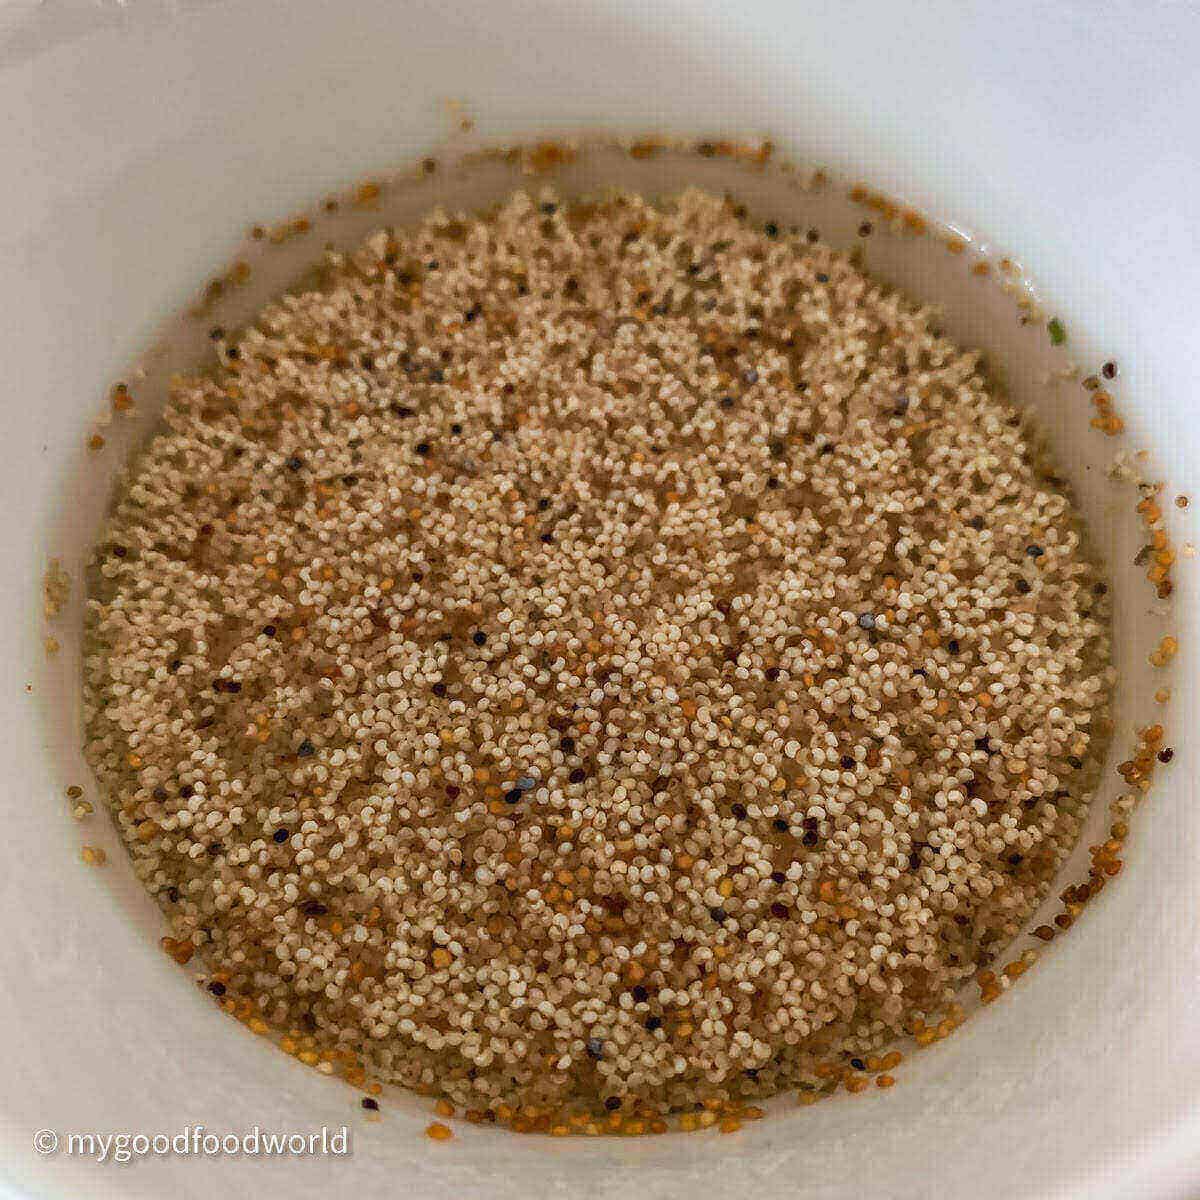 Poppy seeds soaking in warm water and placed in a white bowl.